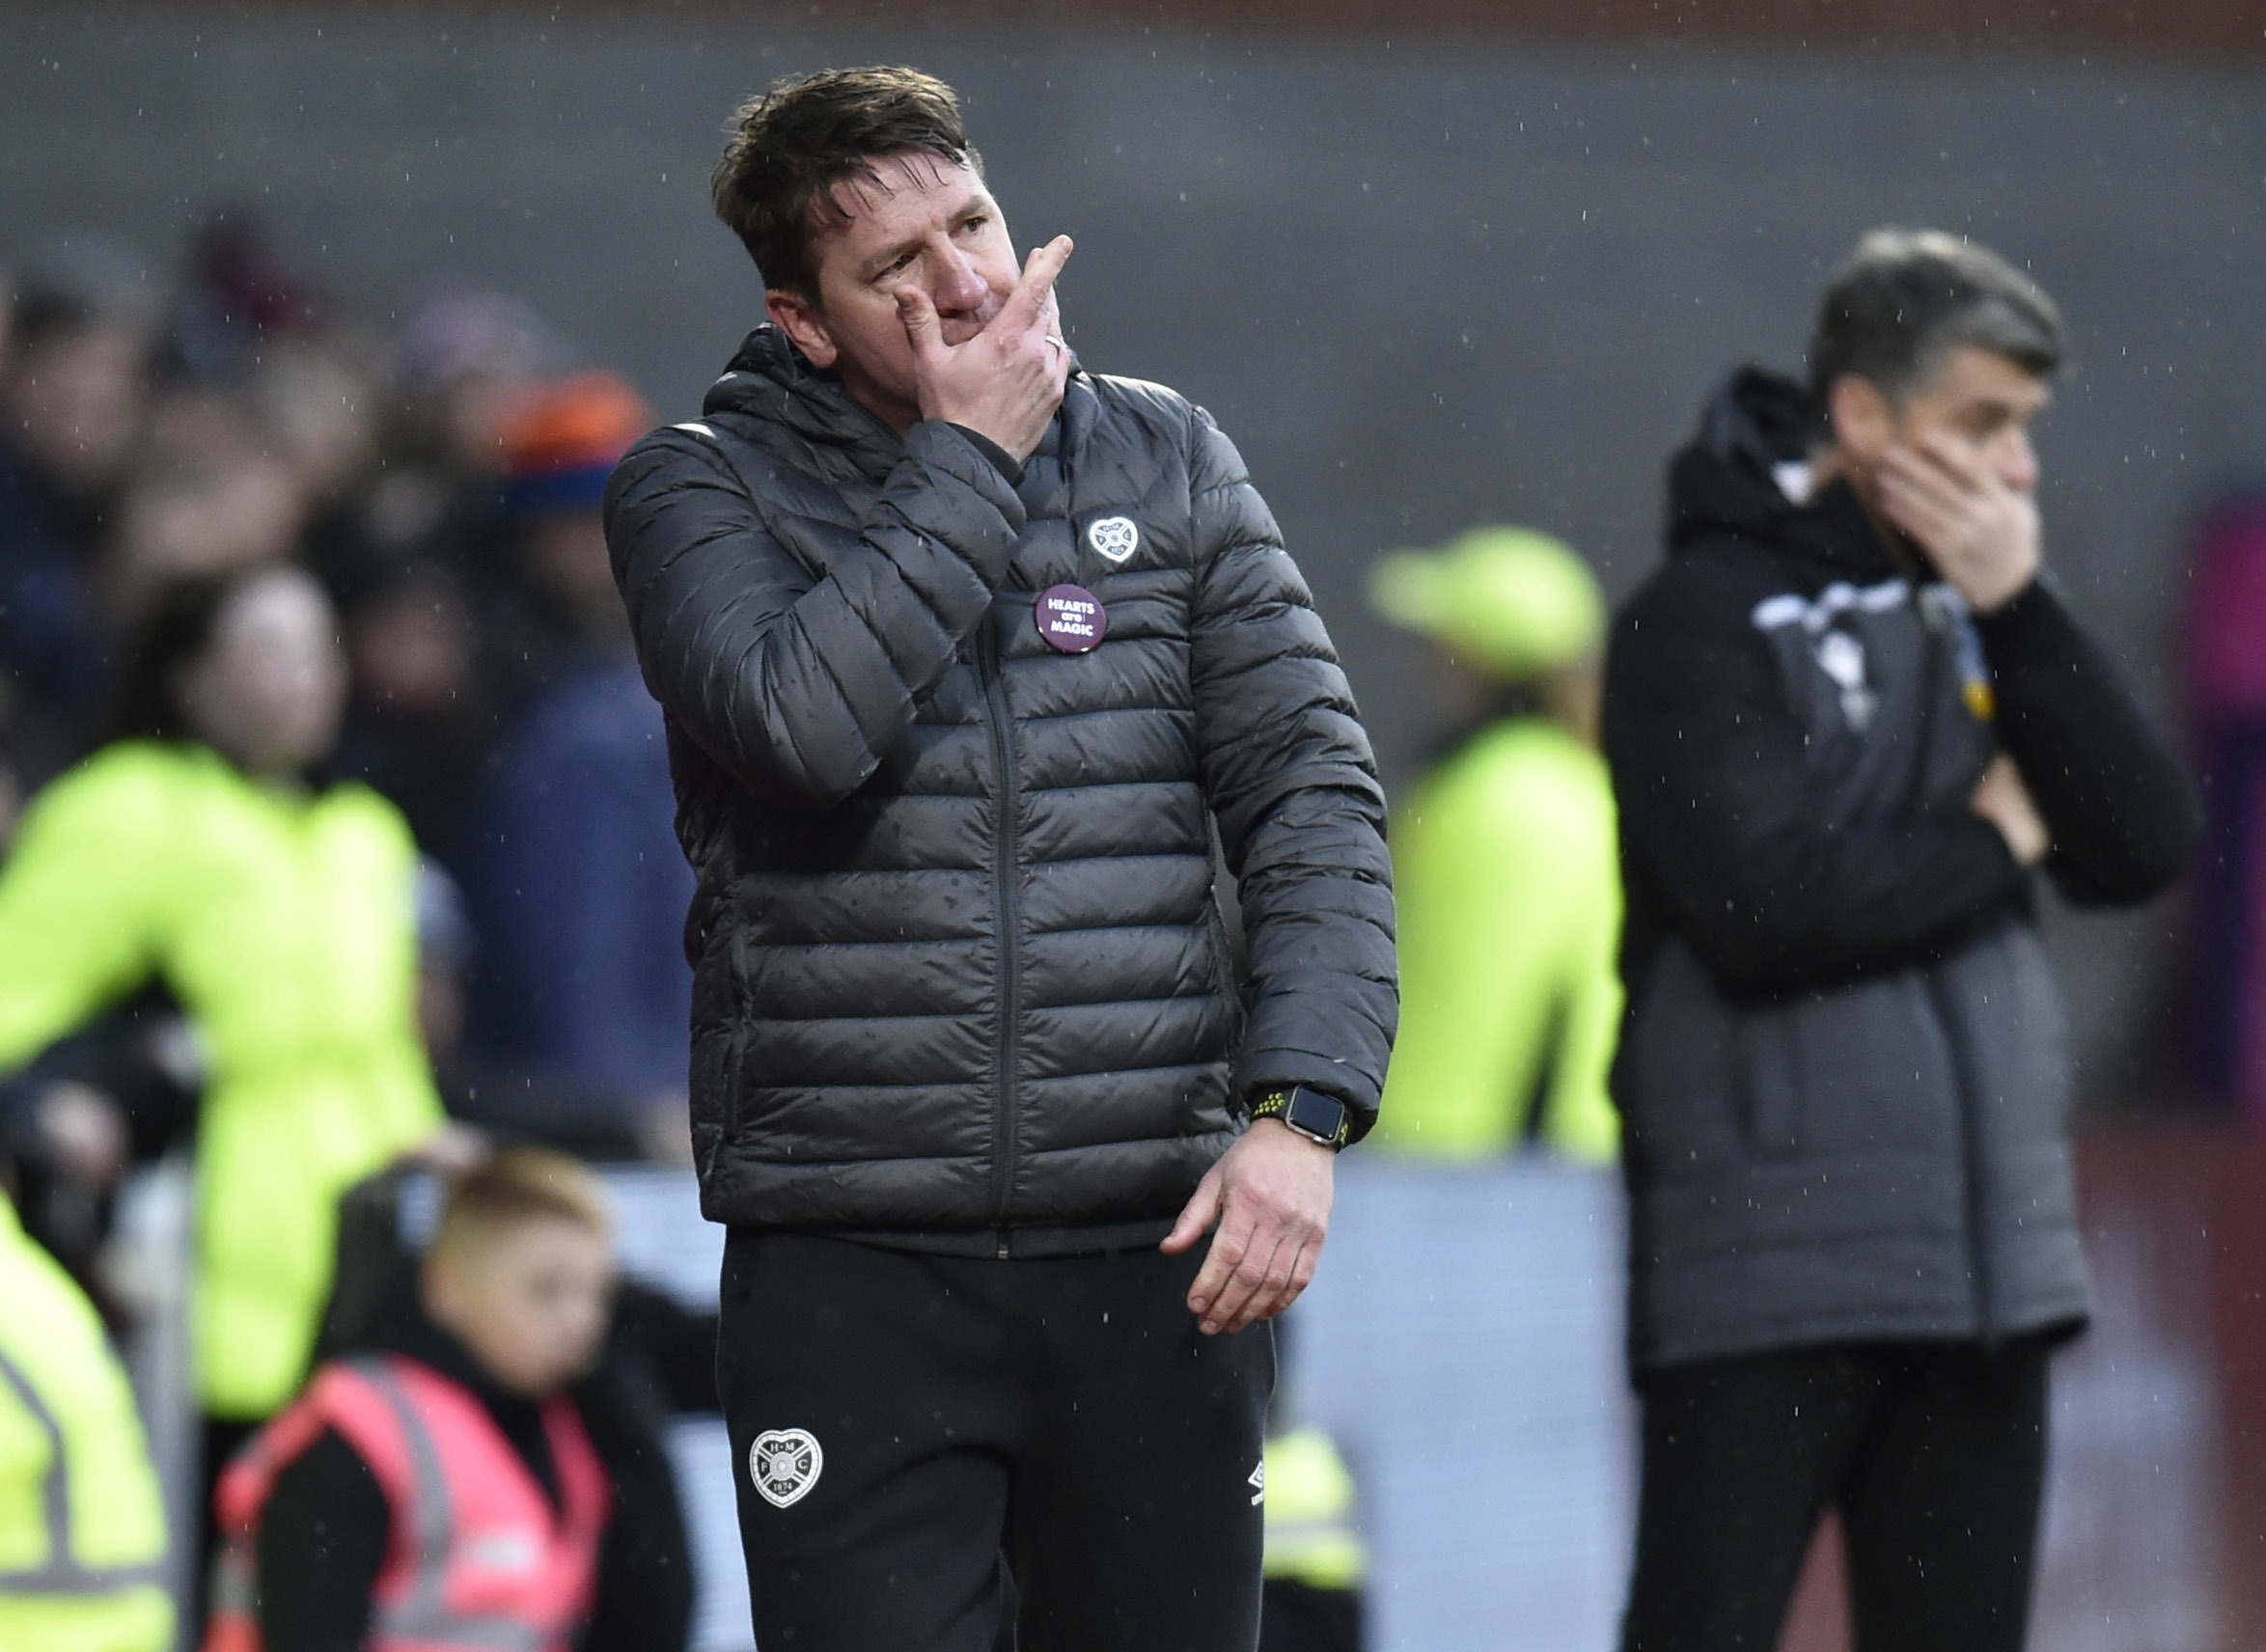 Relegation is harsh – but Hearts were going down